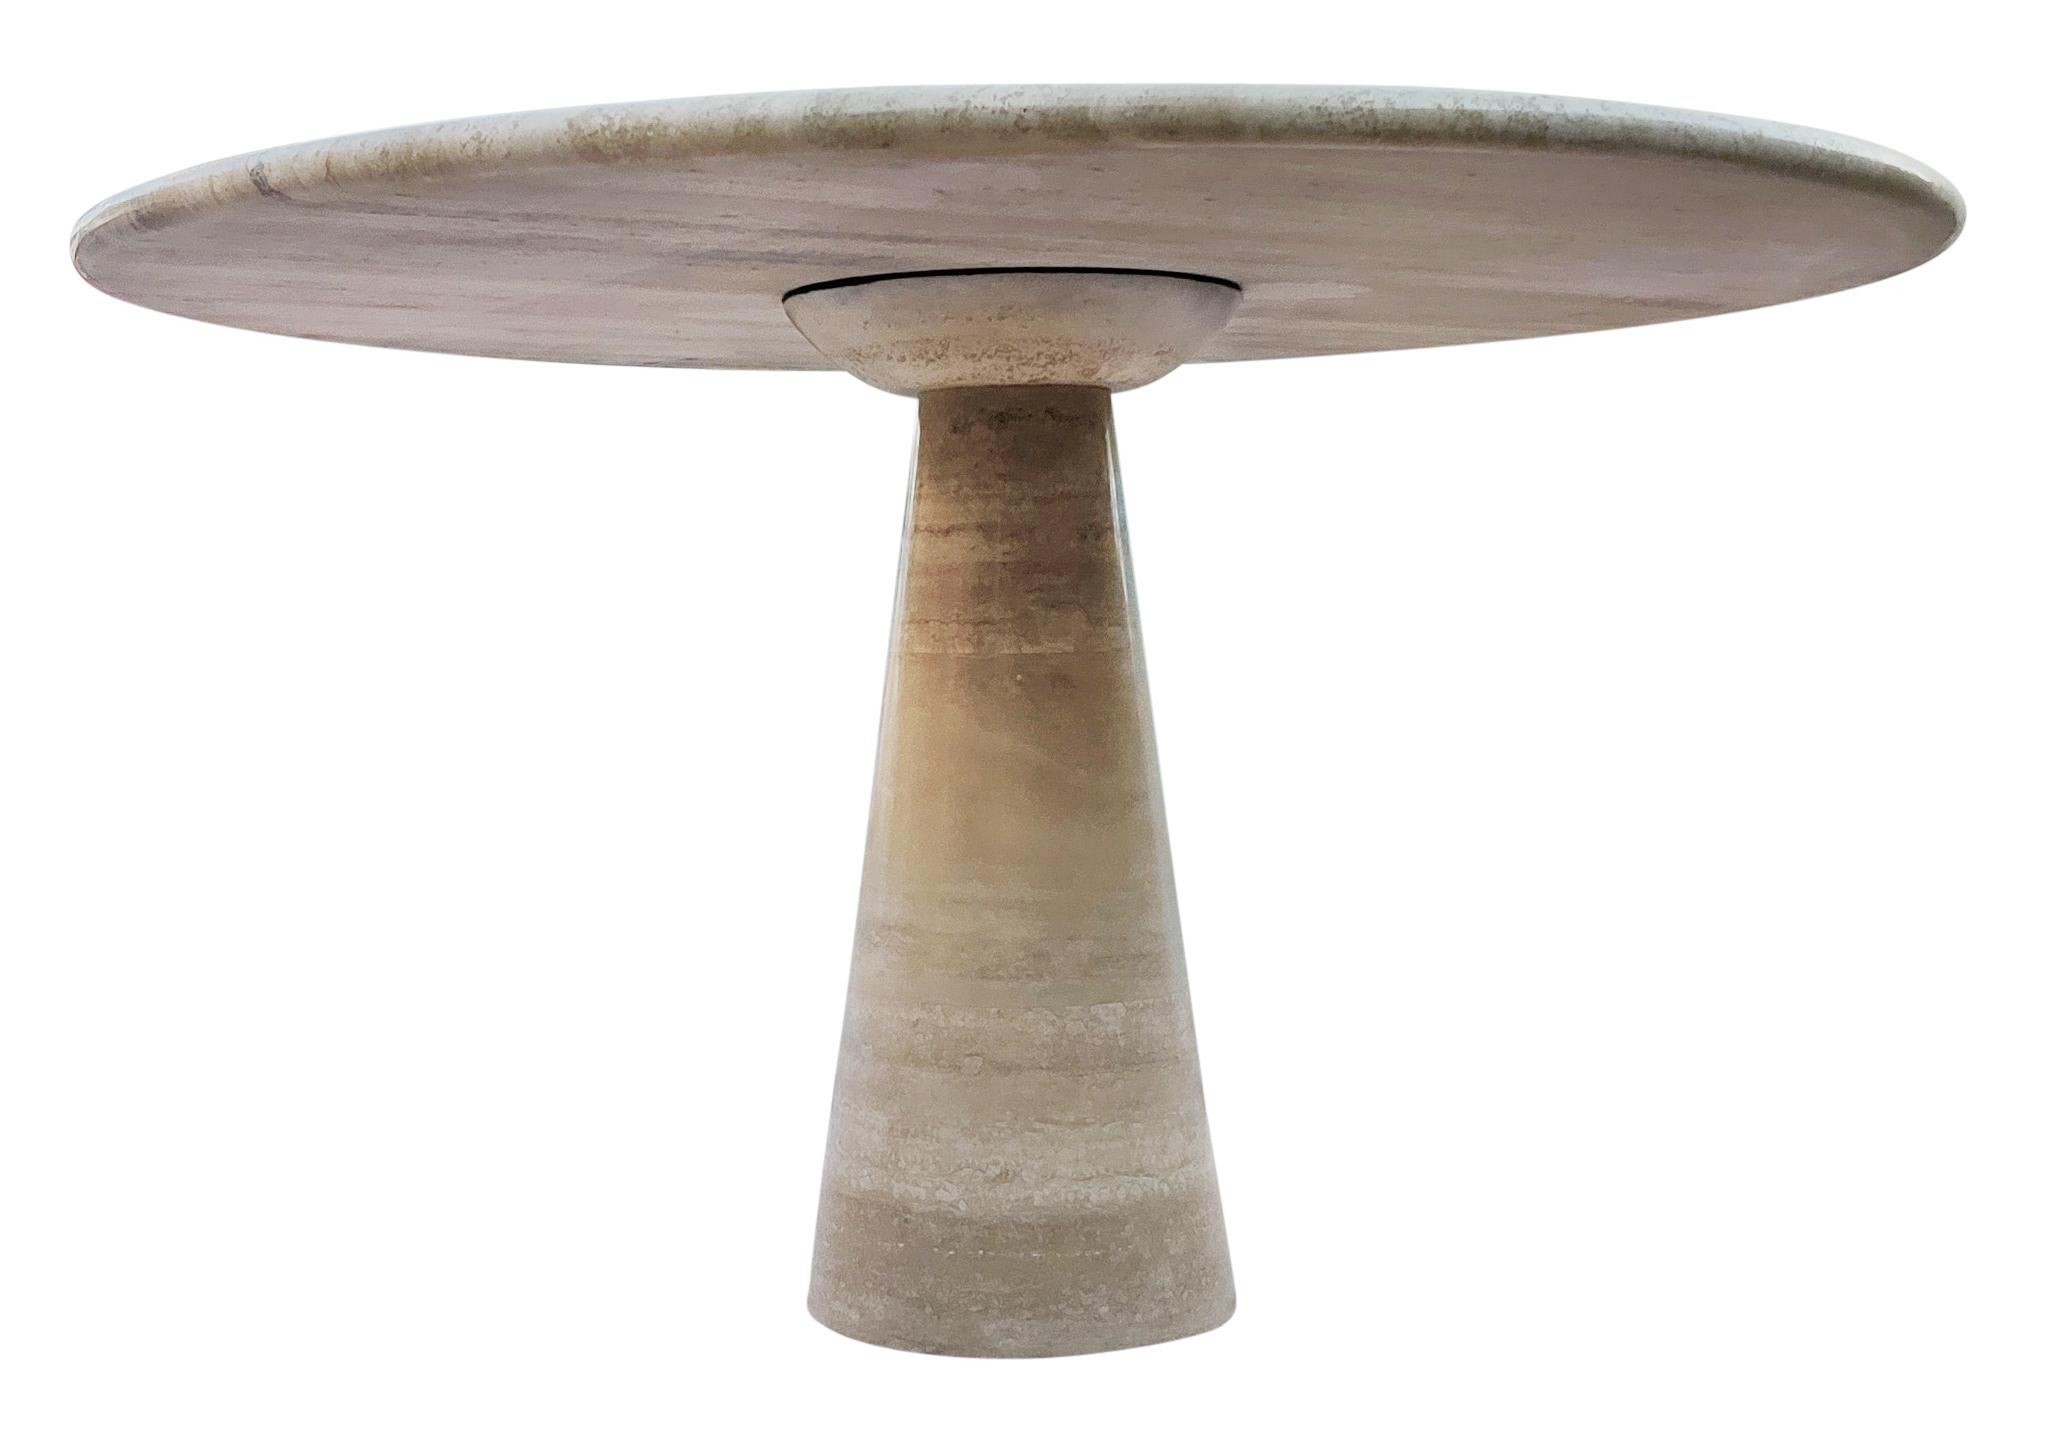 Italian Angelo Mangiarotti Attributed Round Travertine Pedestal Dining Table For Sale